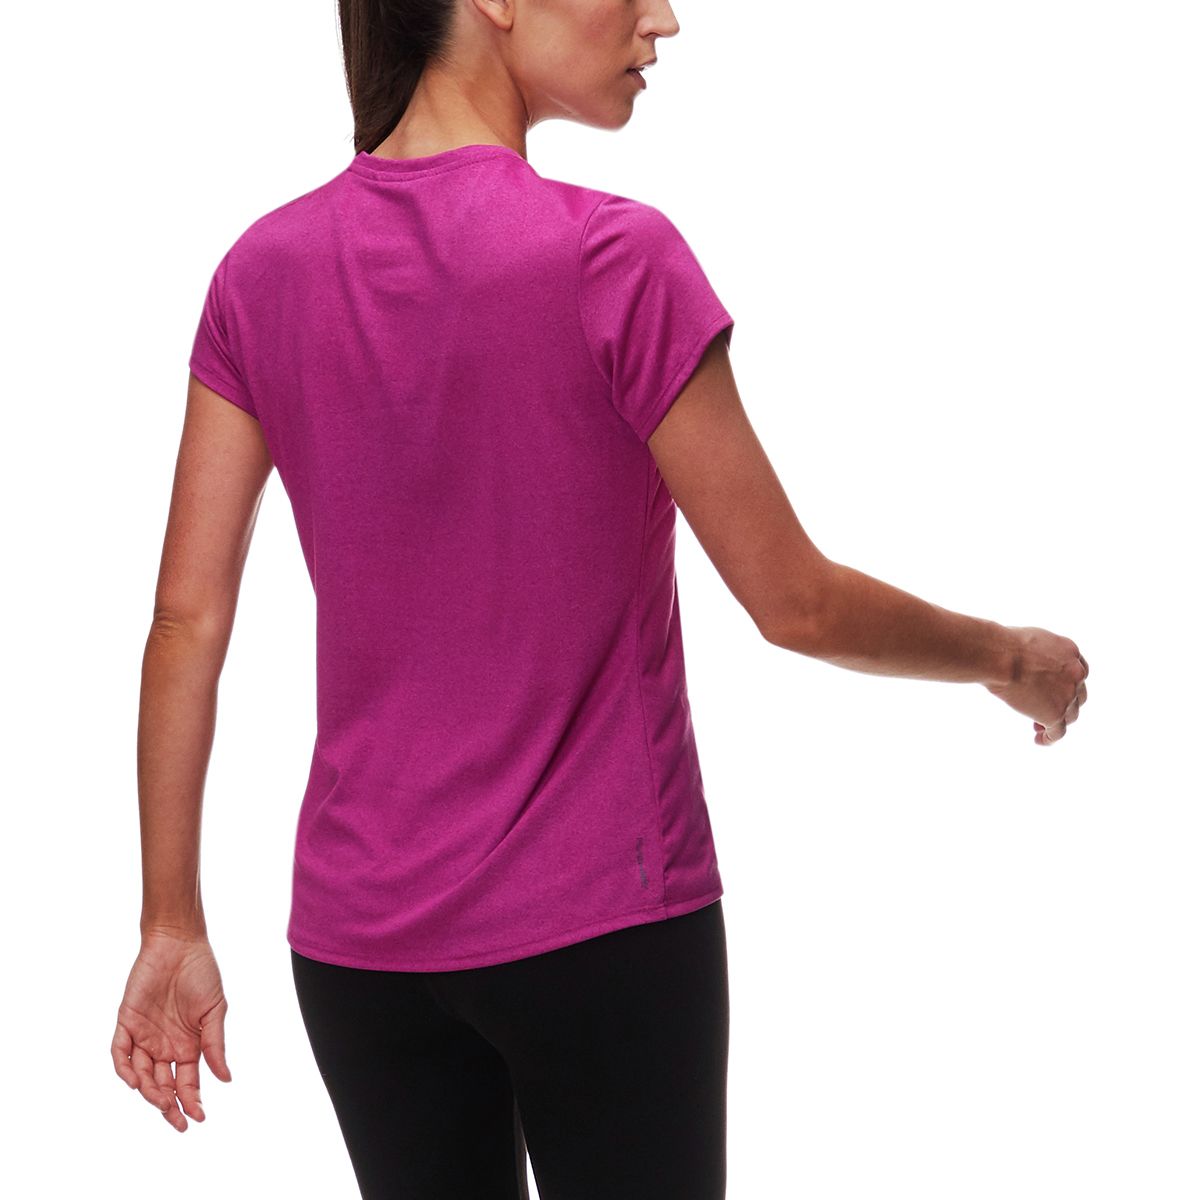 The North Face Reaxion Amp T-Shirt - Women's | Backcountry.com